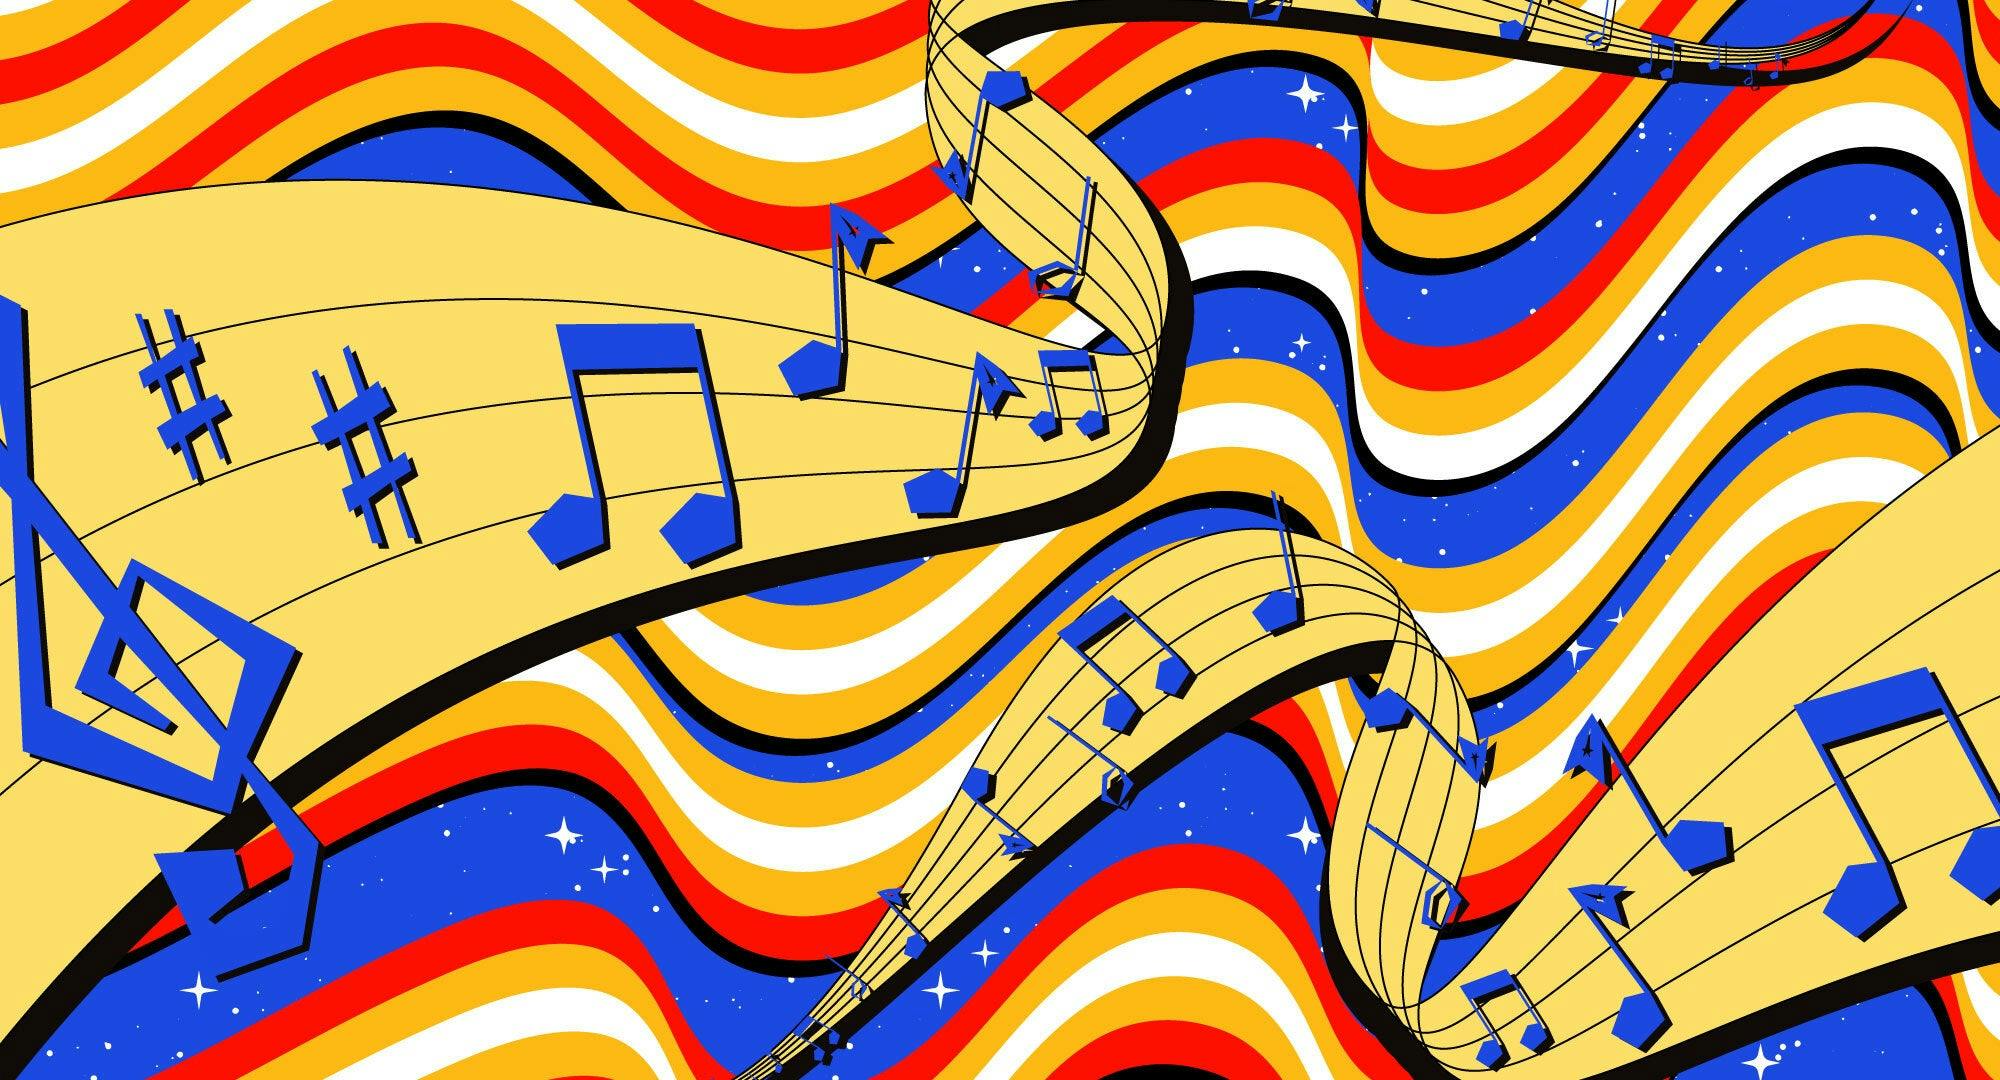 Illustrated banner featuring musical notes